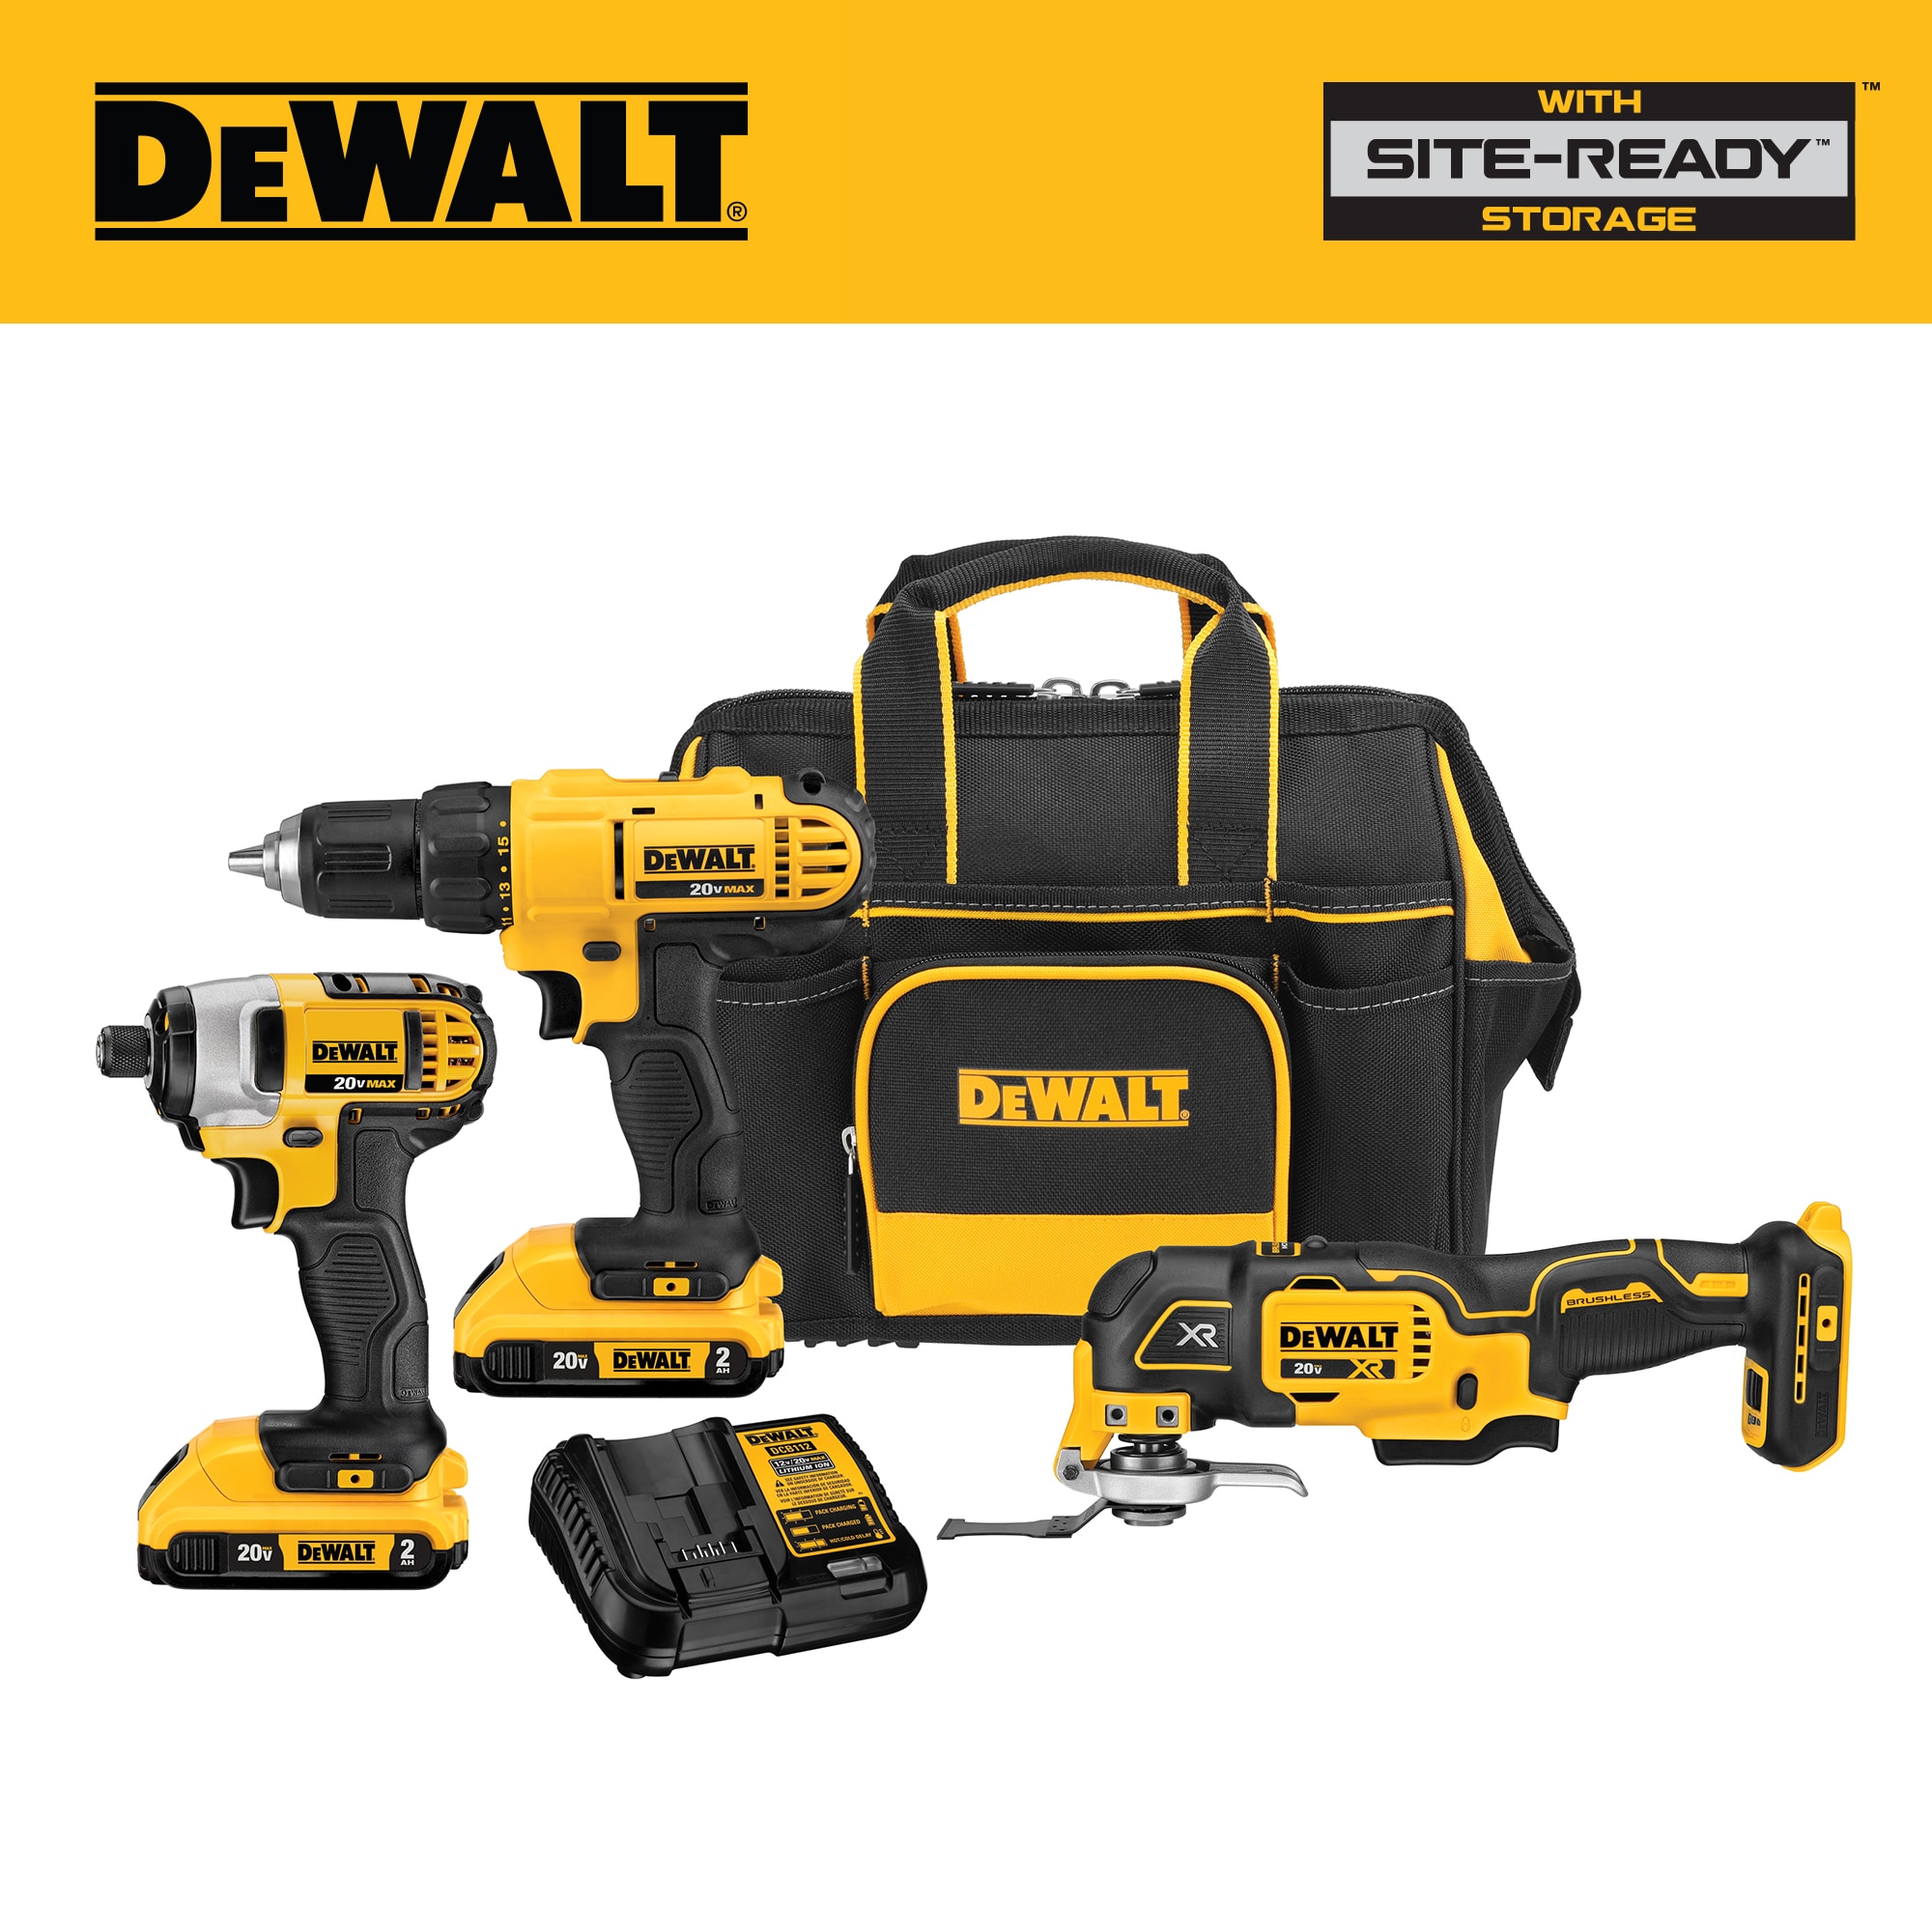 DEWALT 3-Tool Max Power Tool Combo Kit with Soft Case (2-Batteries and charger Included) in the Power Combo Kits at Lowes.com